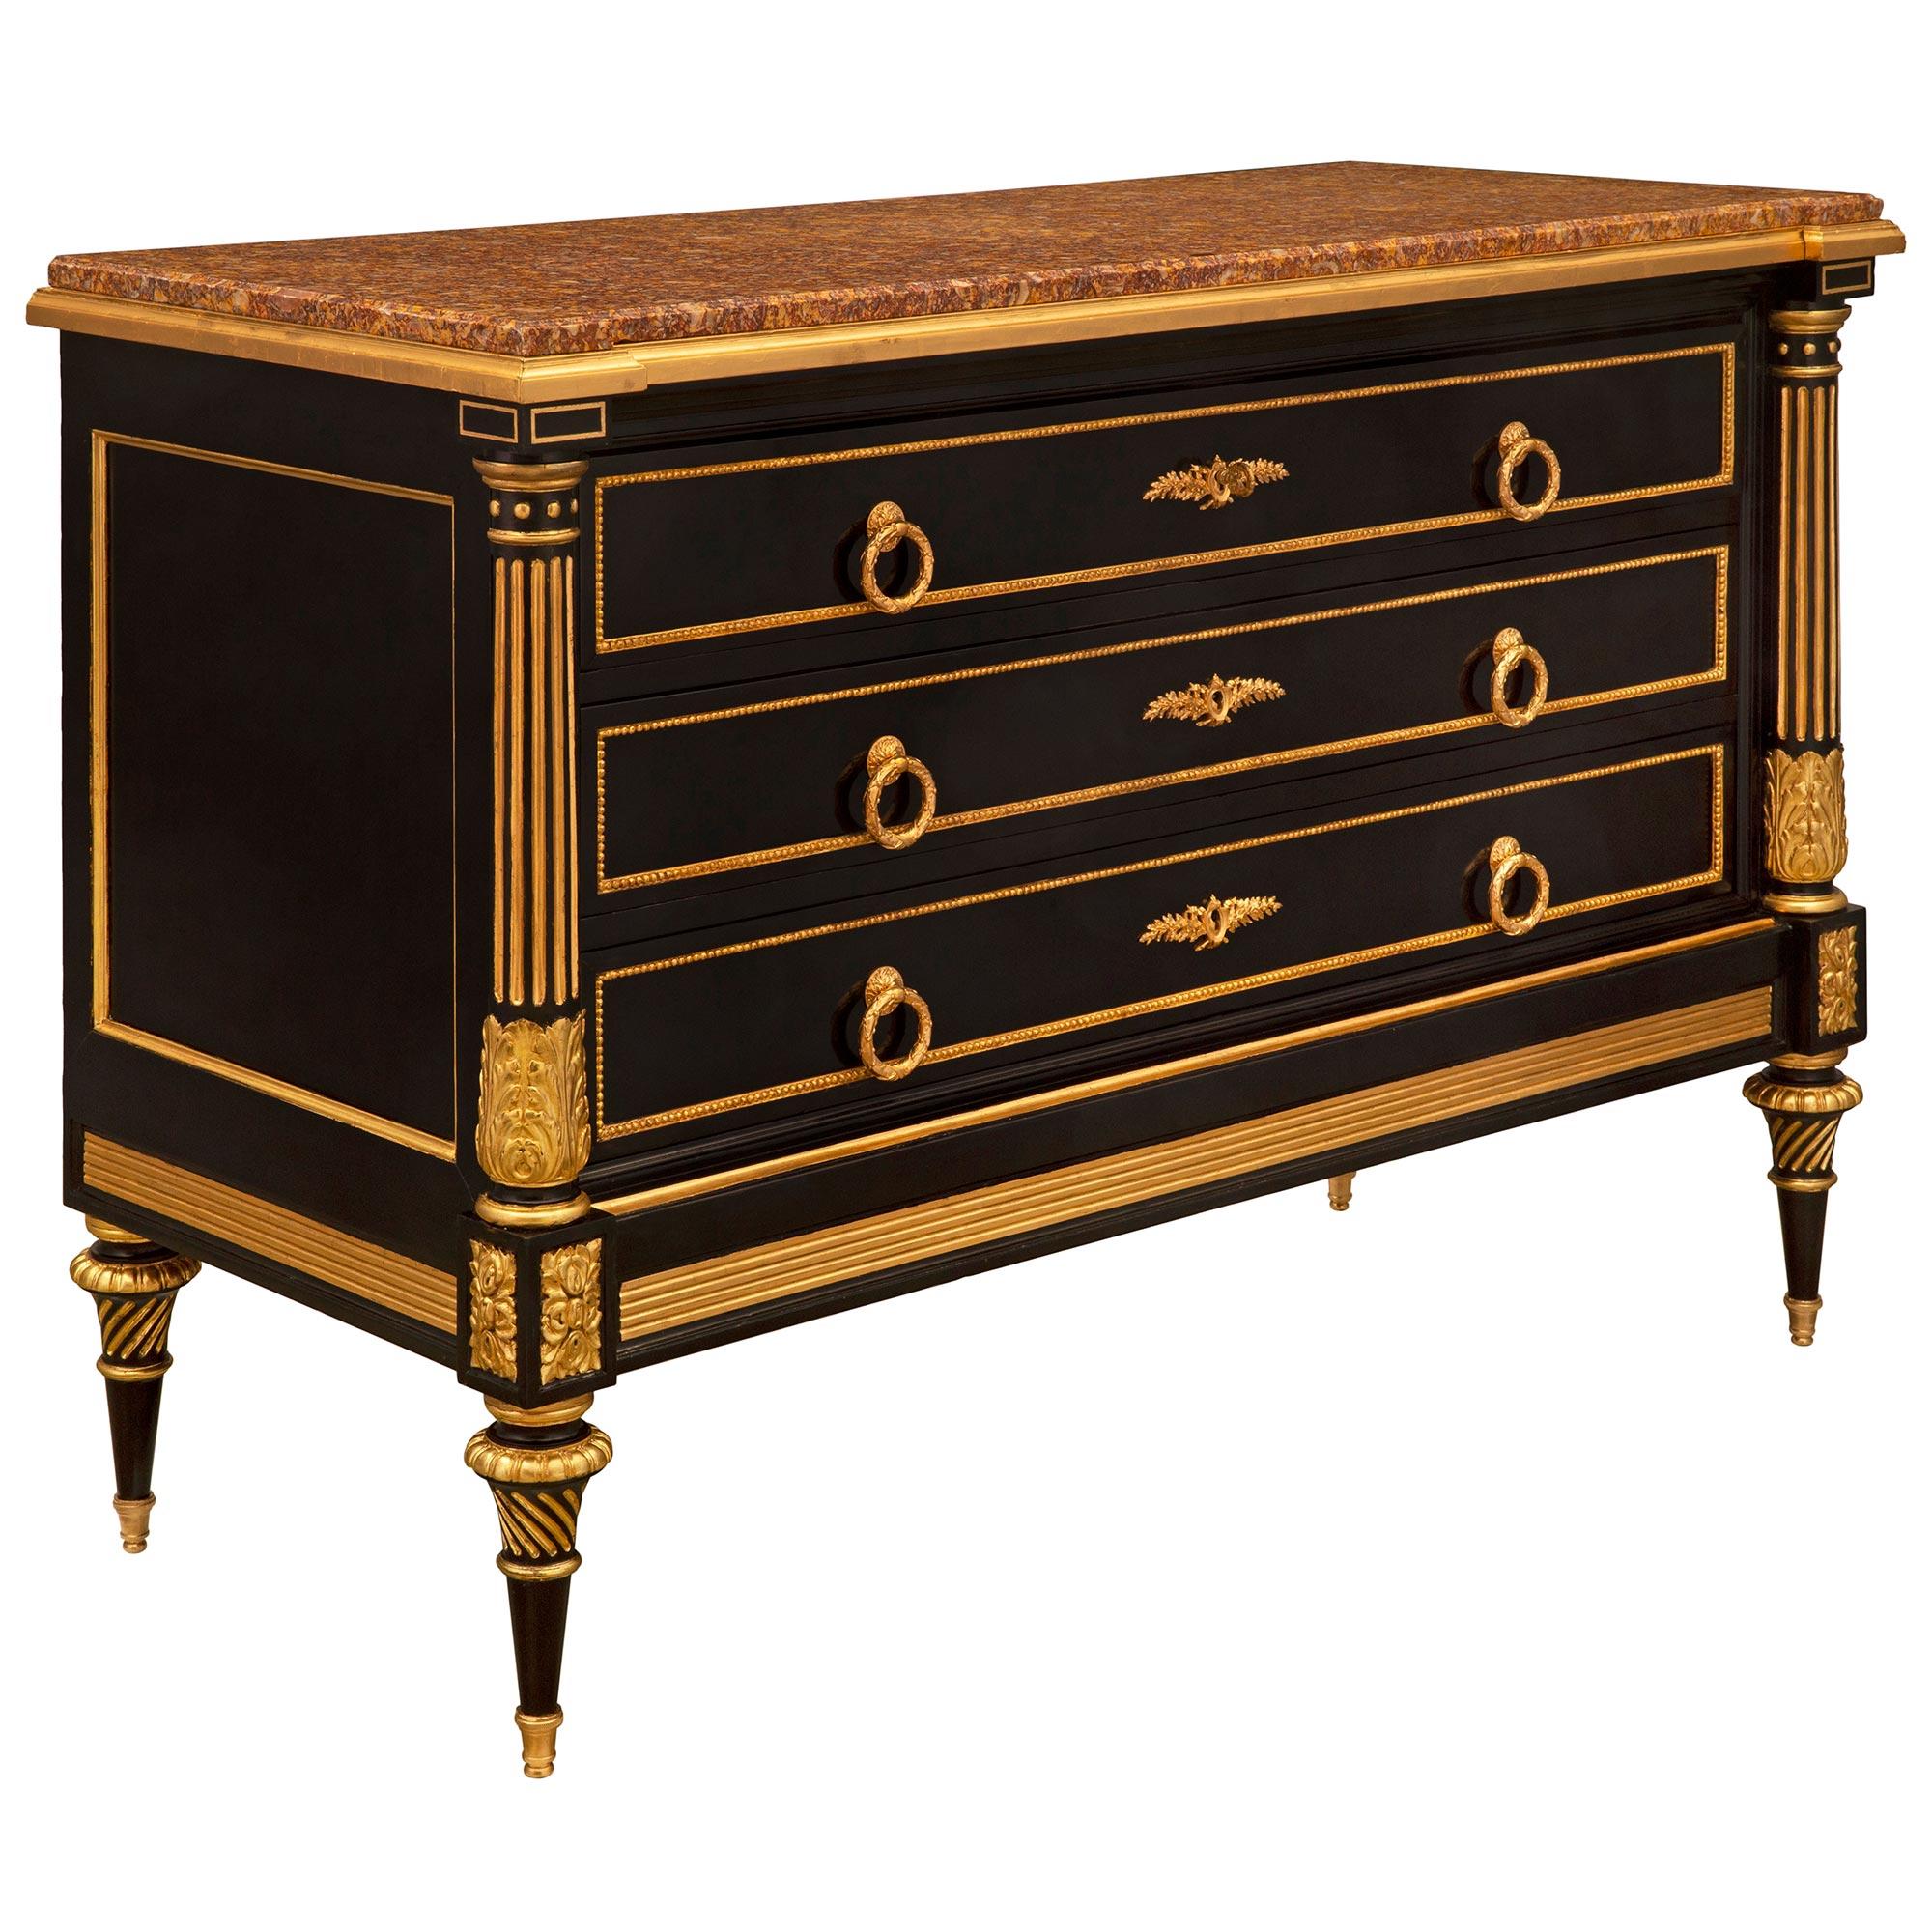 French 19th Century Napoleon III Period Ebony Ormolu Gilt Metal & Marble Commode In Good Condition For Sale In West Palm Beach, FL